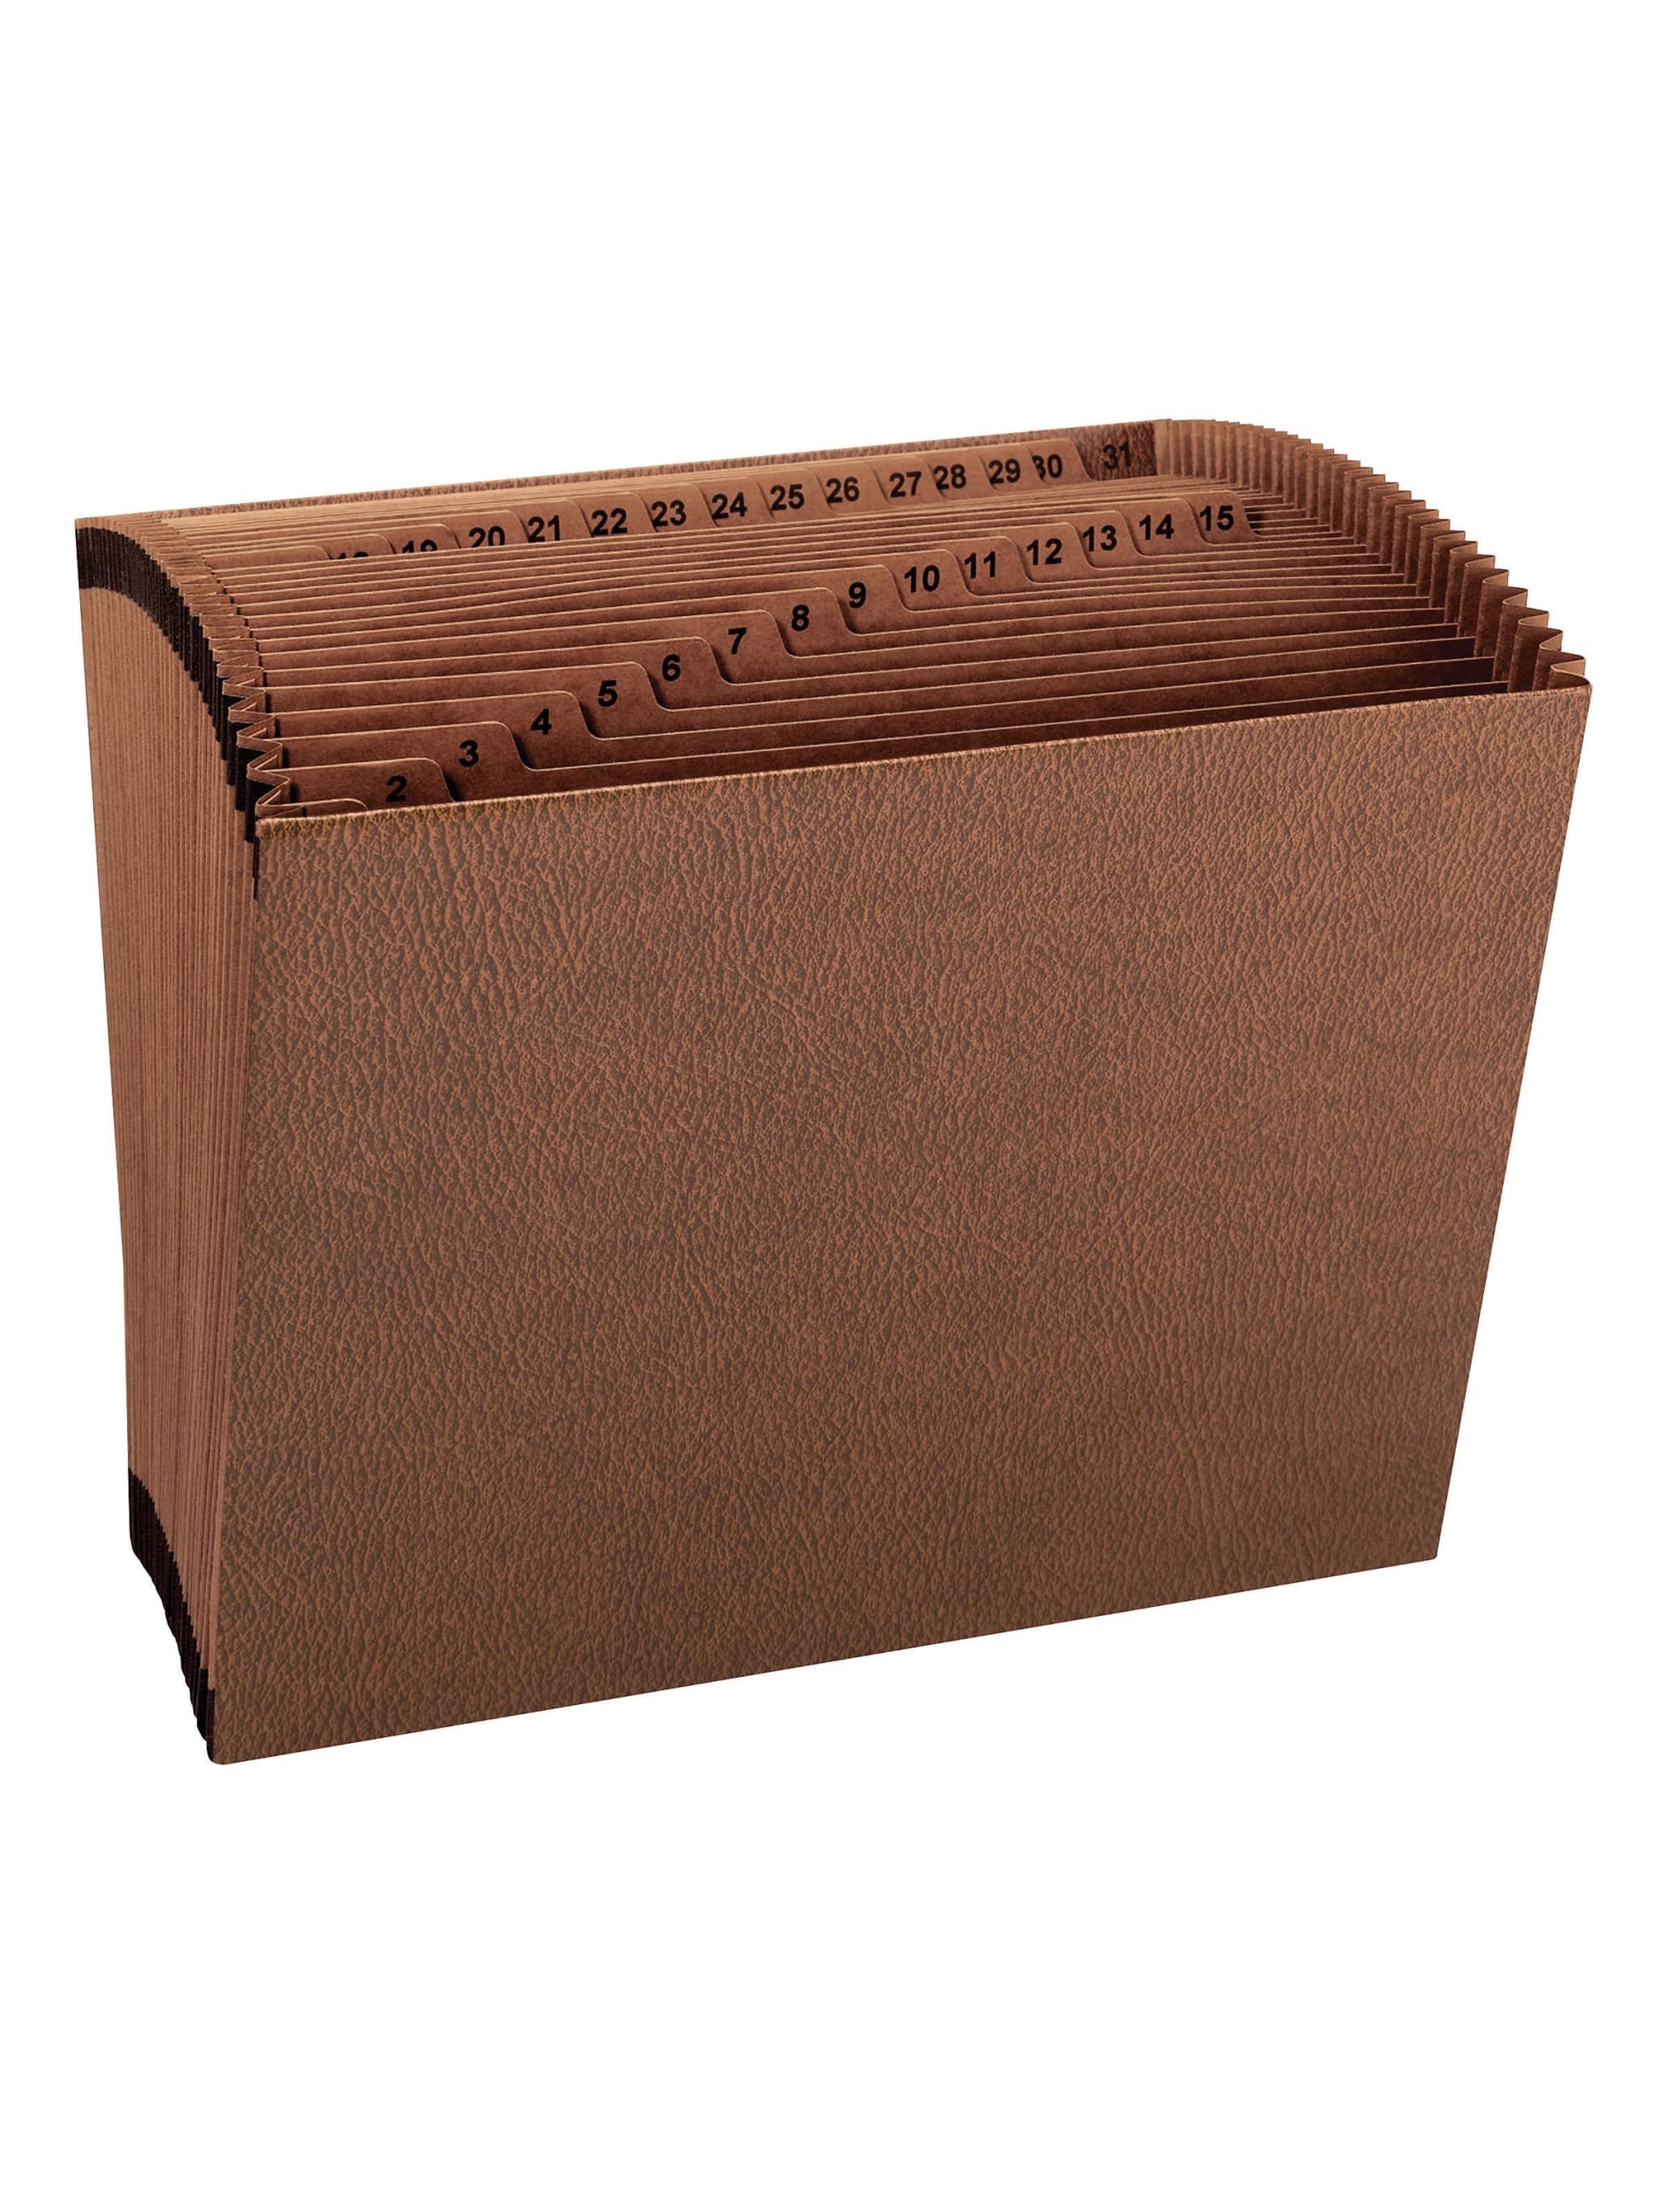 TUFF® Expanding Files, 12 Pockets, Daily 1-31, Brown Color, Letter Size, Set of 1, 086486704670